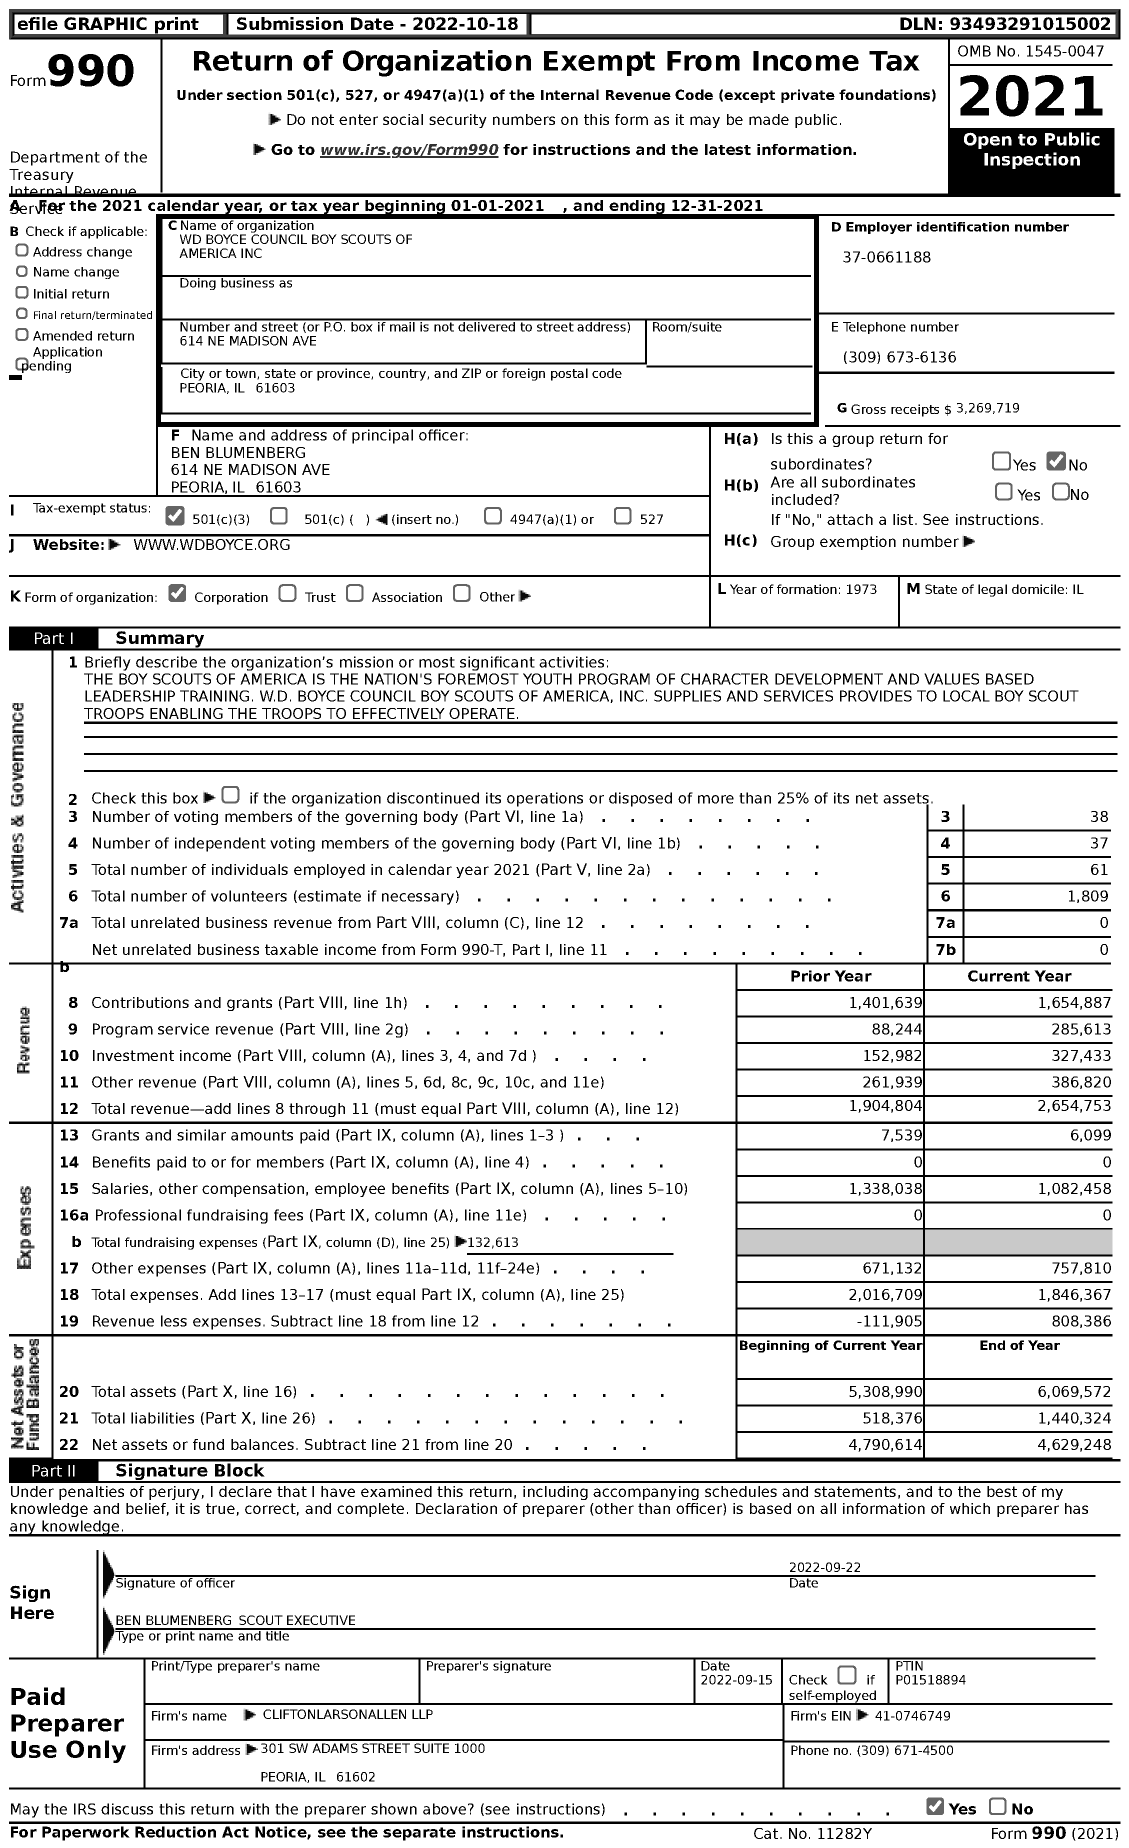 Image of first page of 2021 Form 990 for Boy Scouts of America - 138 W D Boyce Council